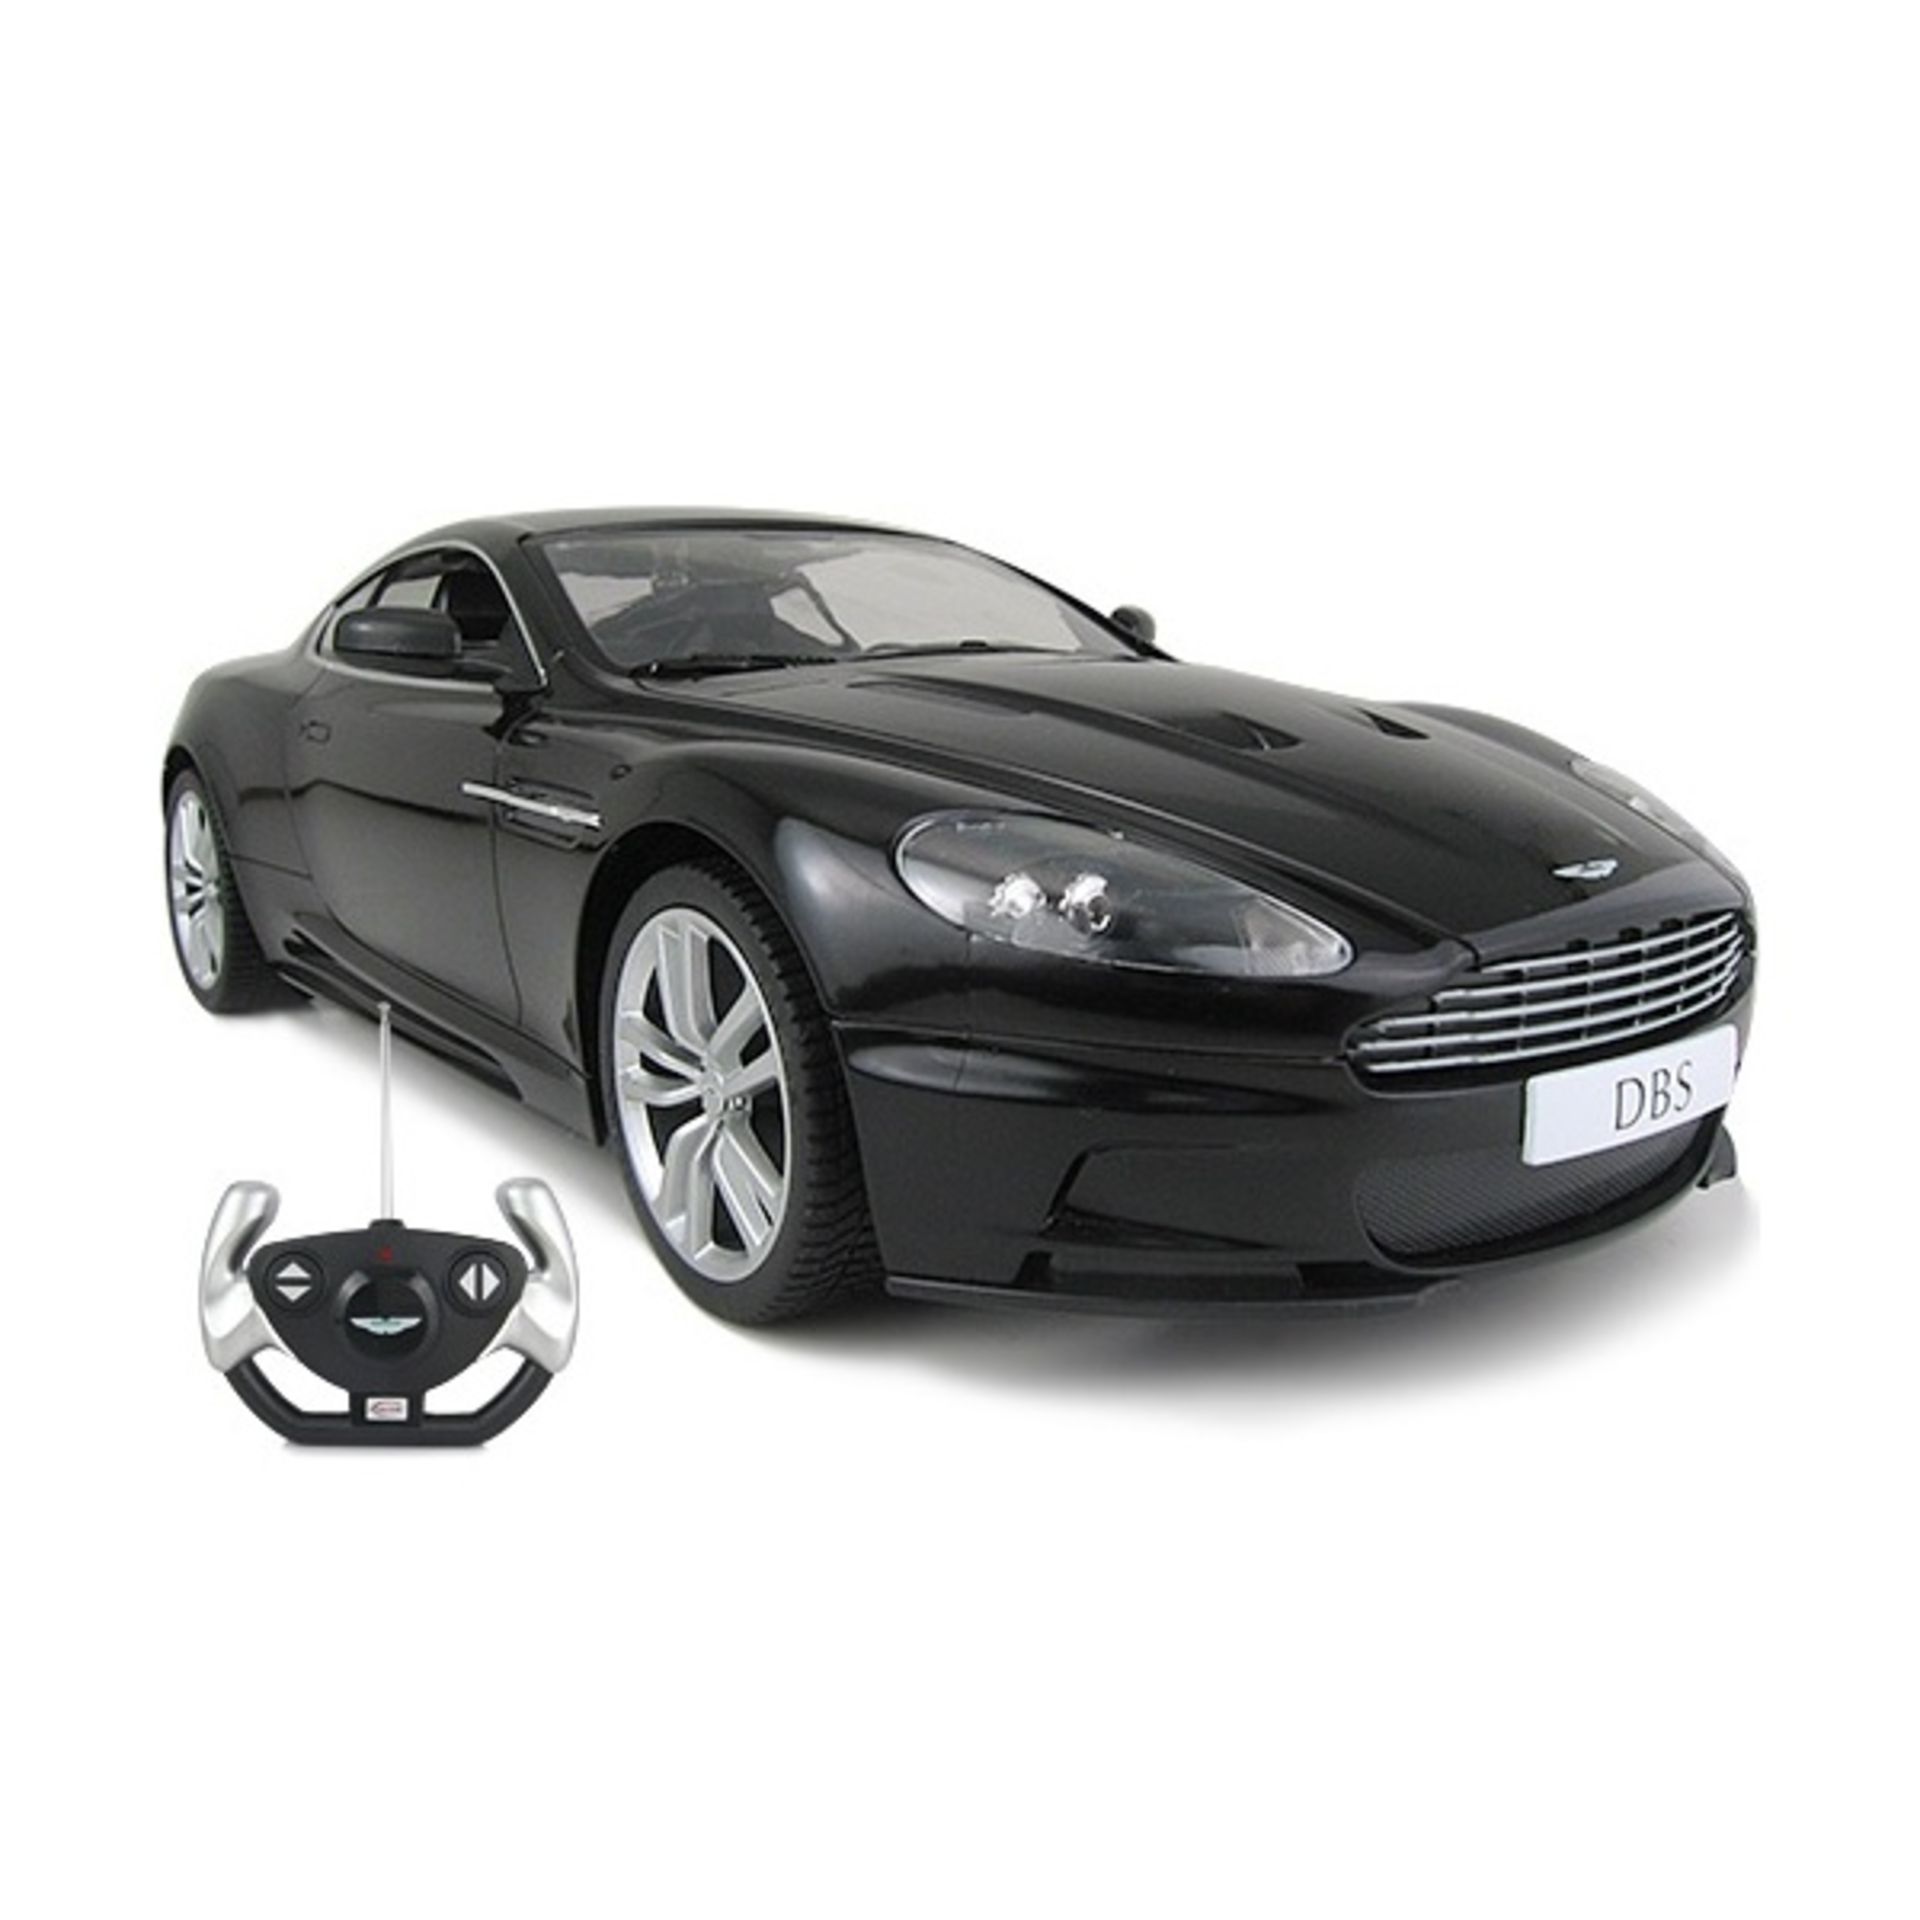 V *TRADE QTY* Brand New Aston Martin DBS Coupe 1/10 Scale (Very Big) - Radio Control - Assorted